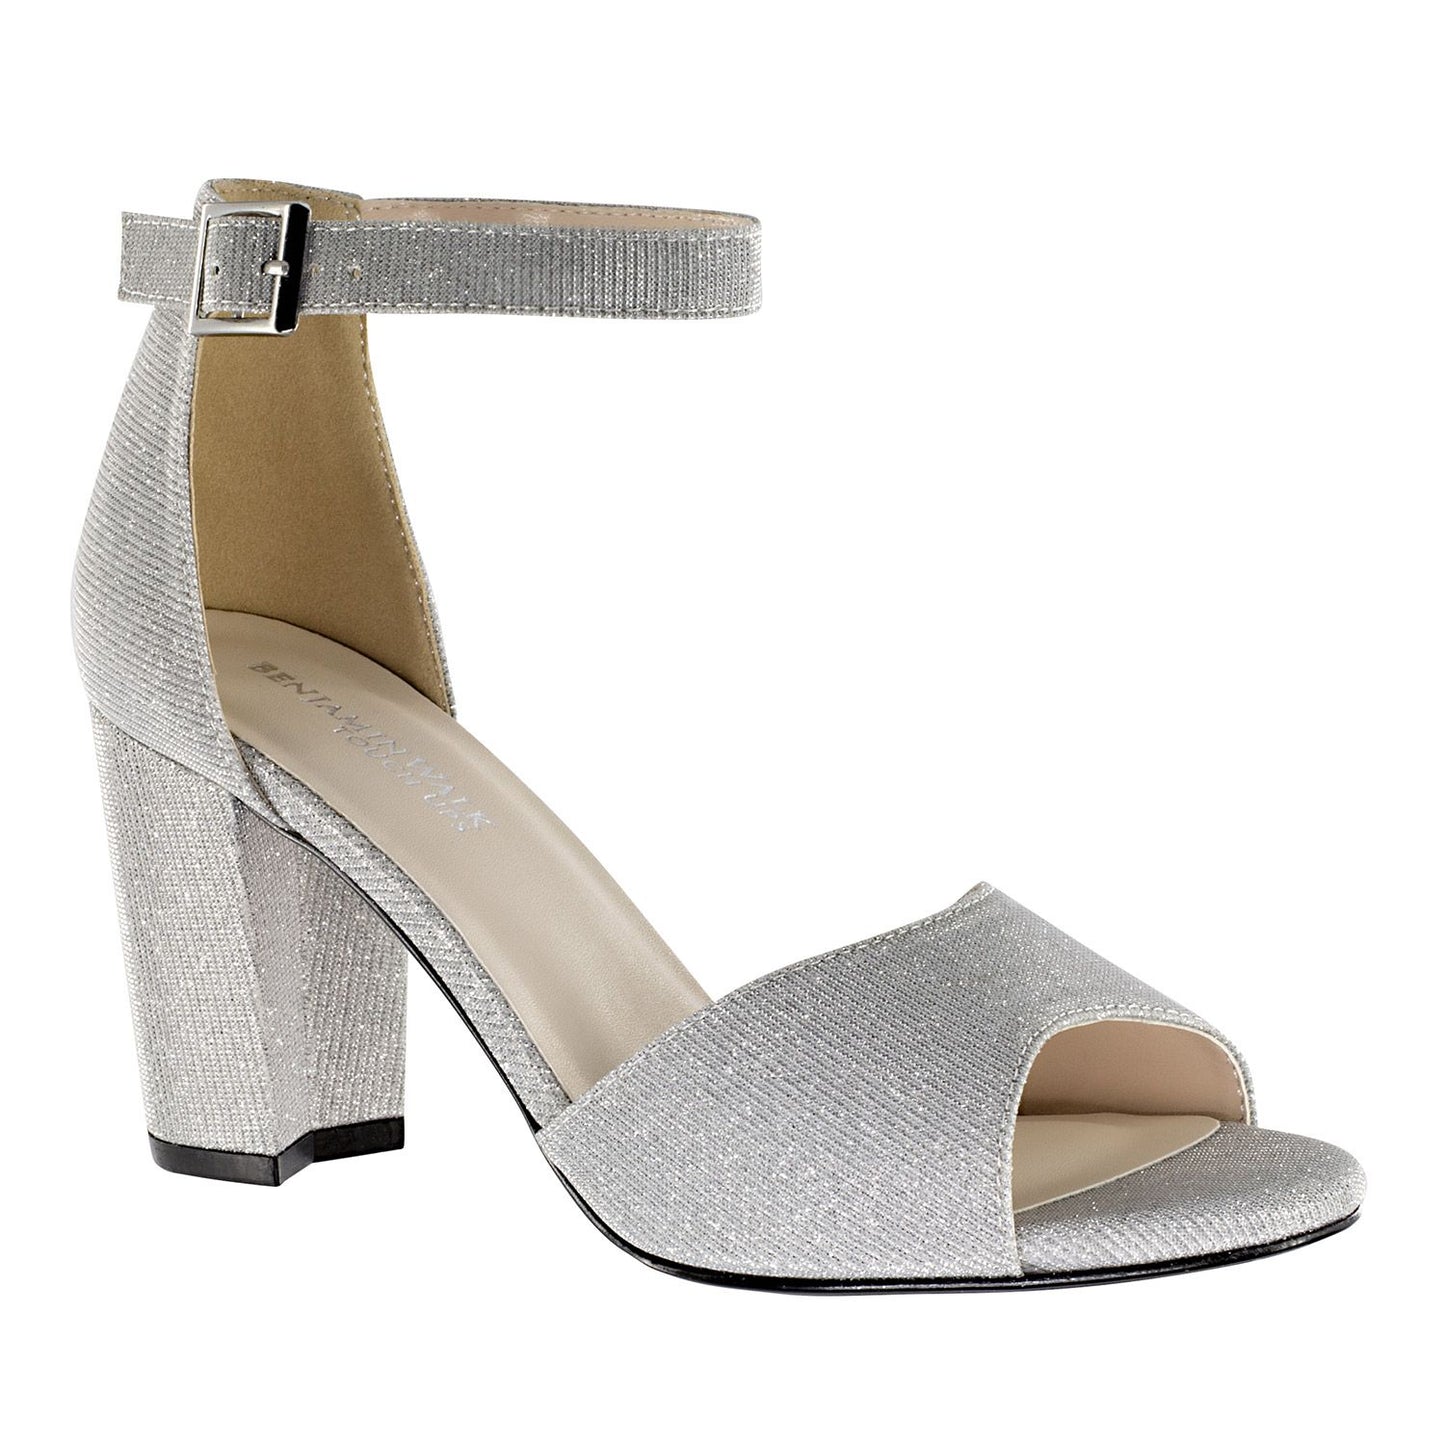 Open toe champagne shoe with a 2.5 block heel and adjustable strap with buckle